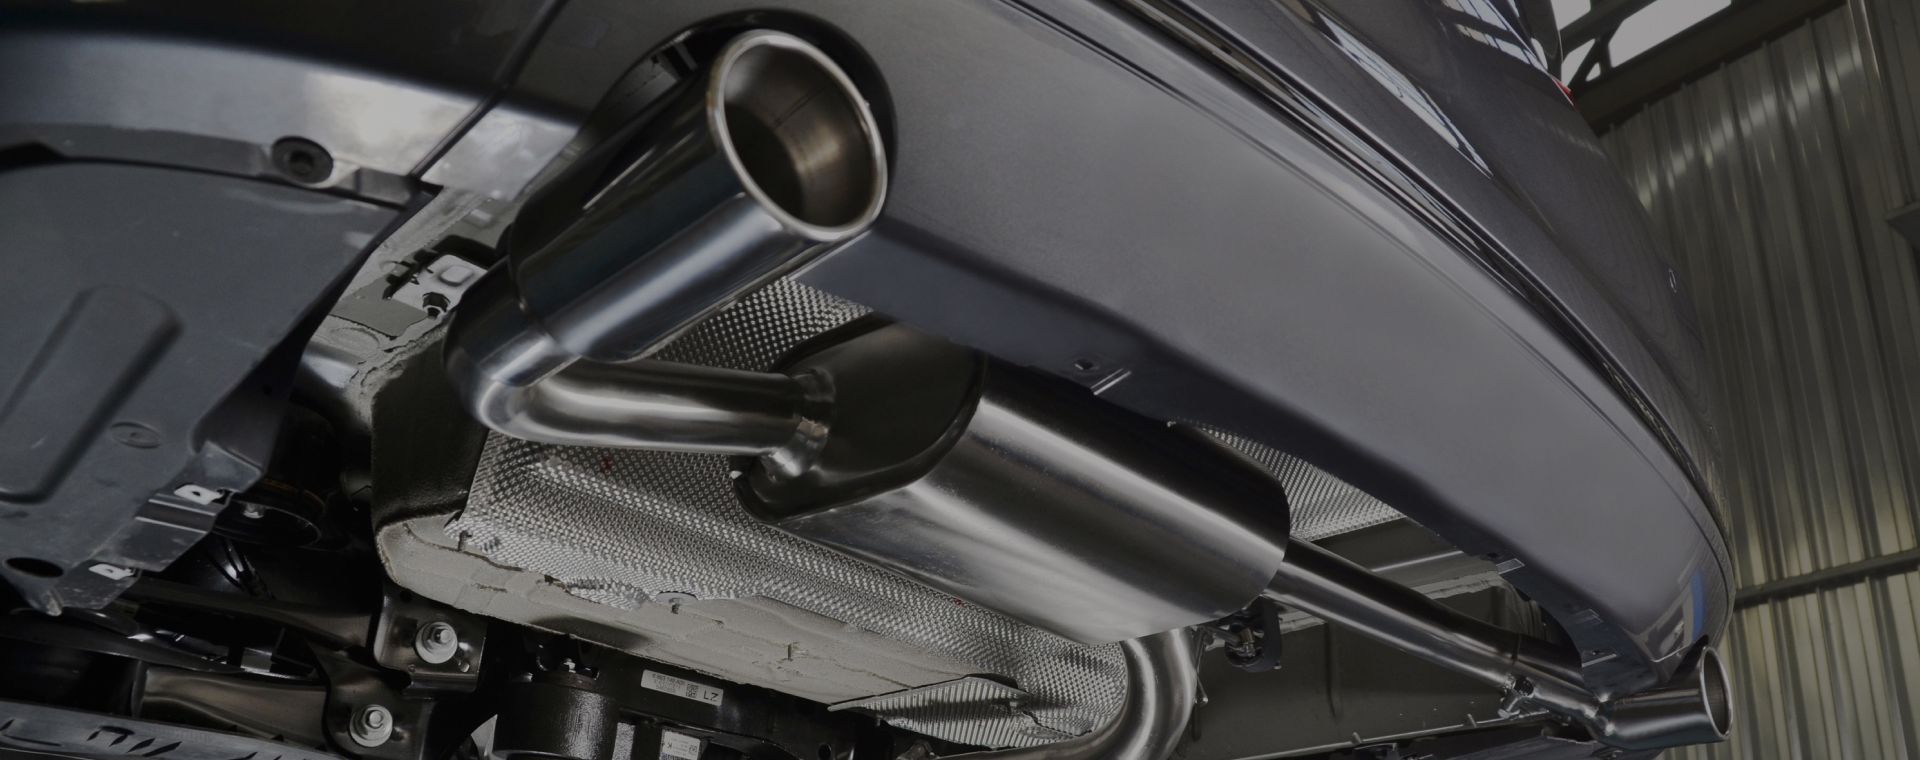 The exhaust system of a vehicle | Ledgewood Car Care & Exhaust